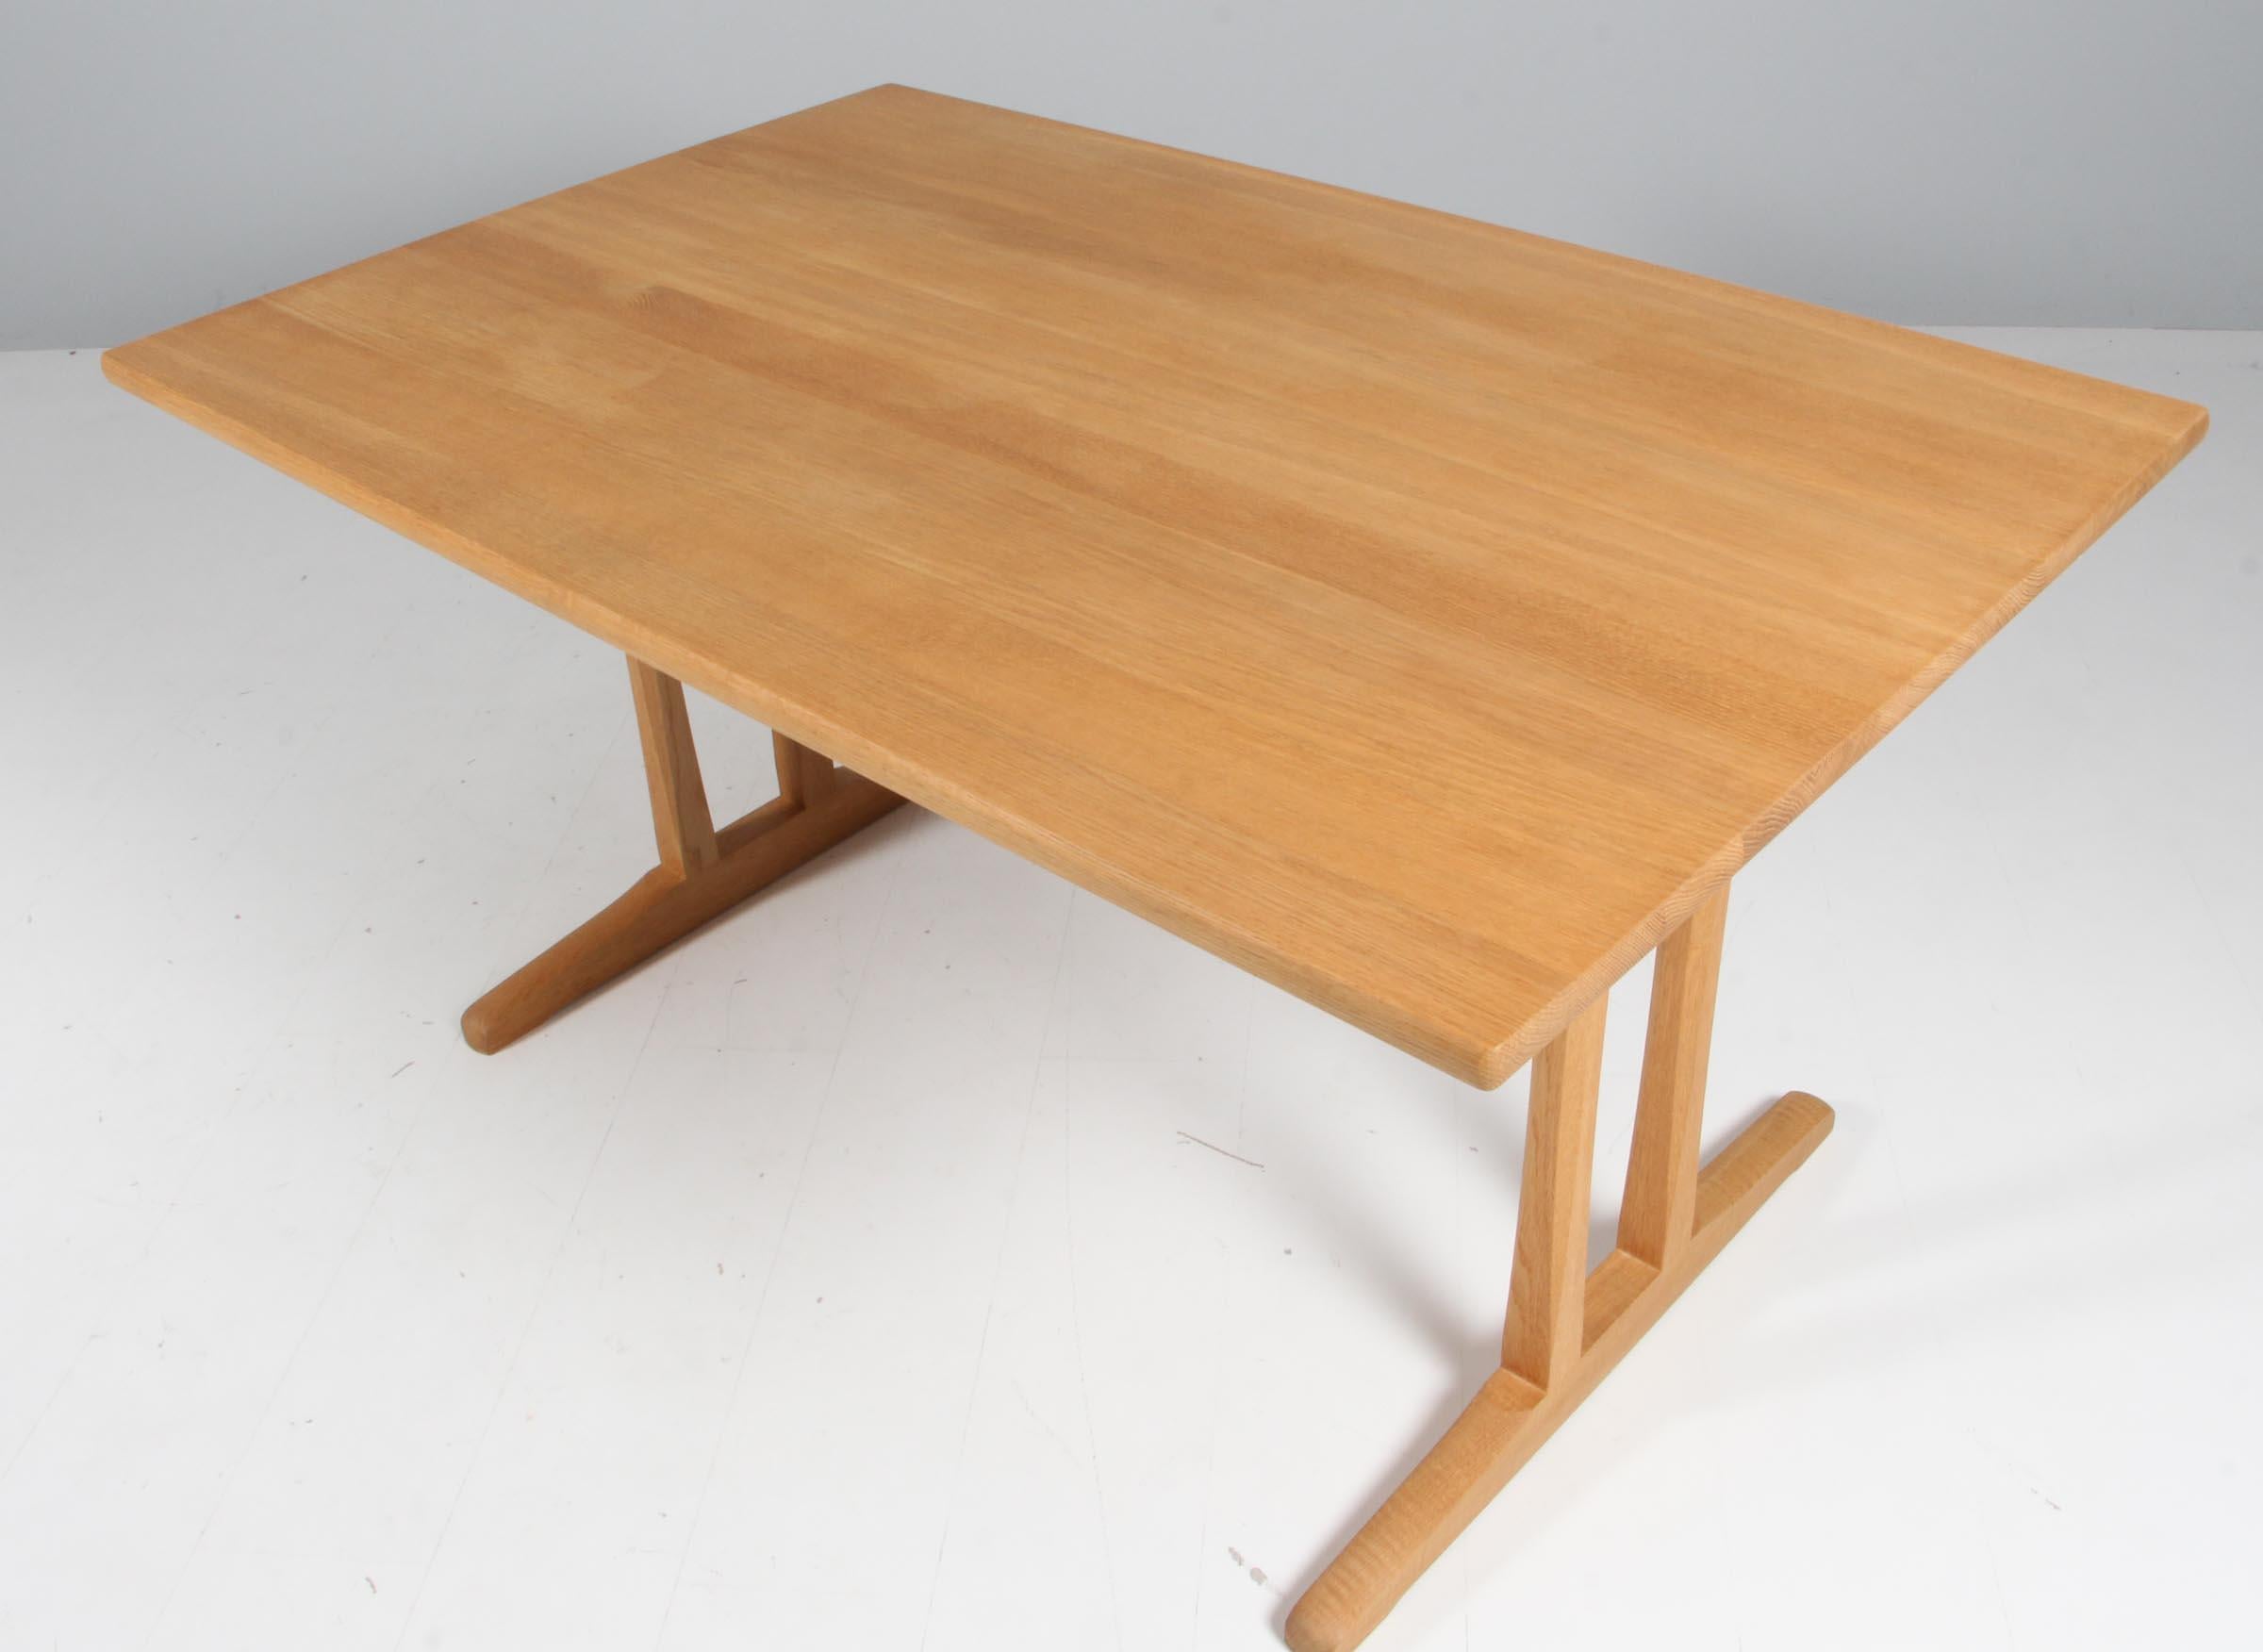 Børge Mogensen shaker dining table in solid soaptreated oak. 

With extension leafes

Made by FDB,